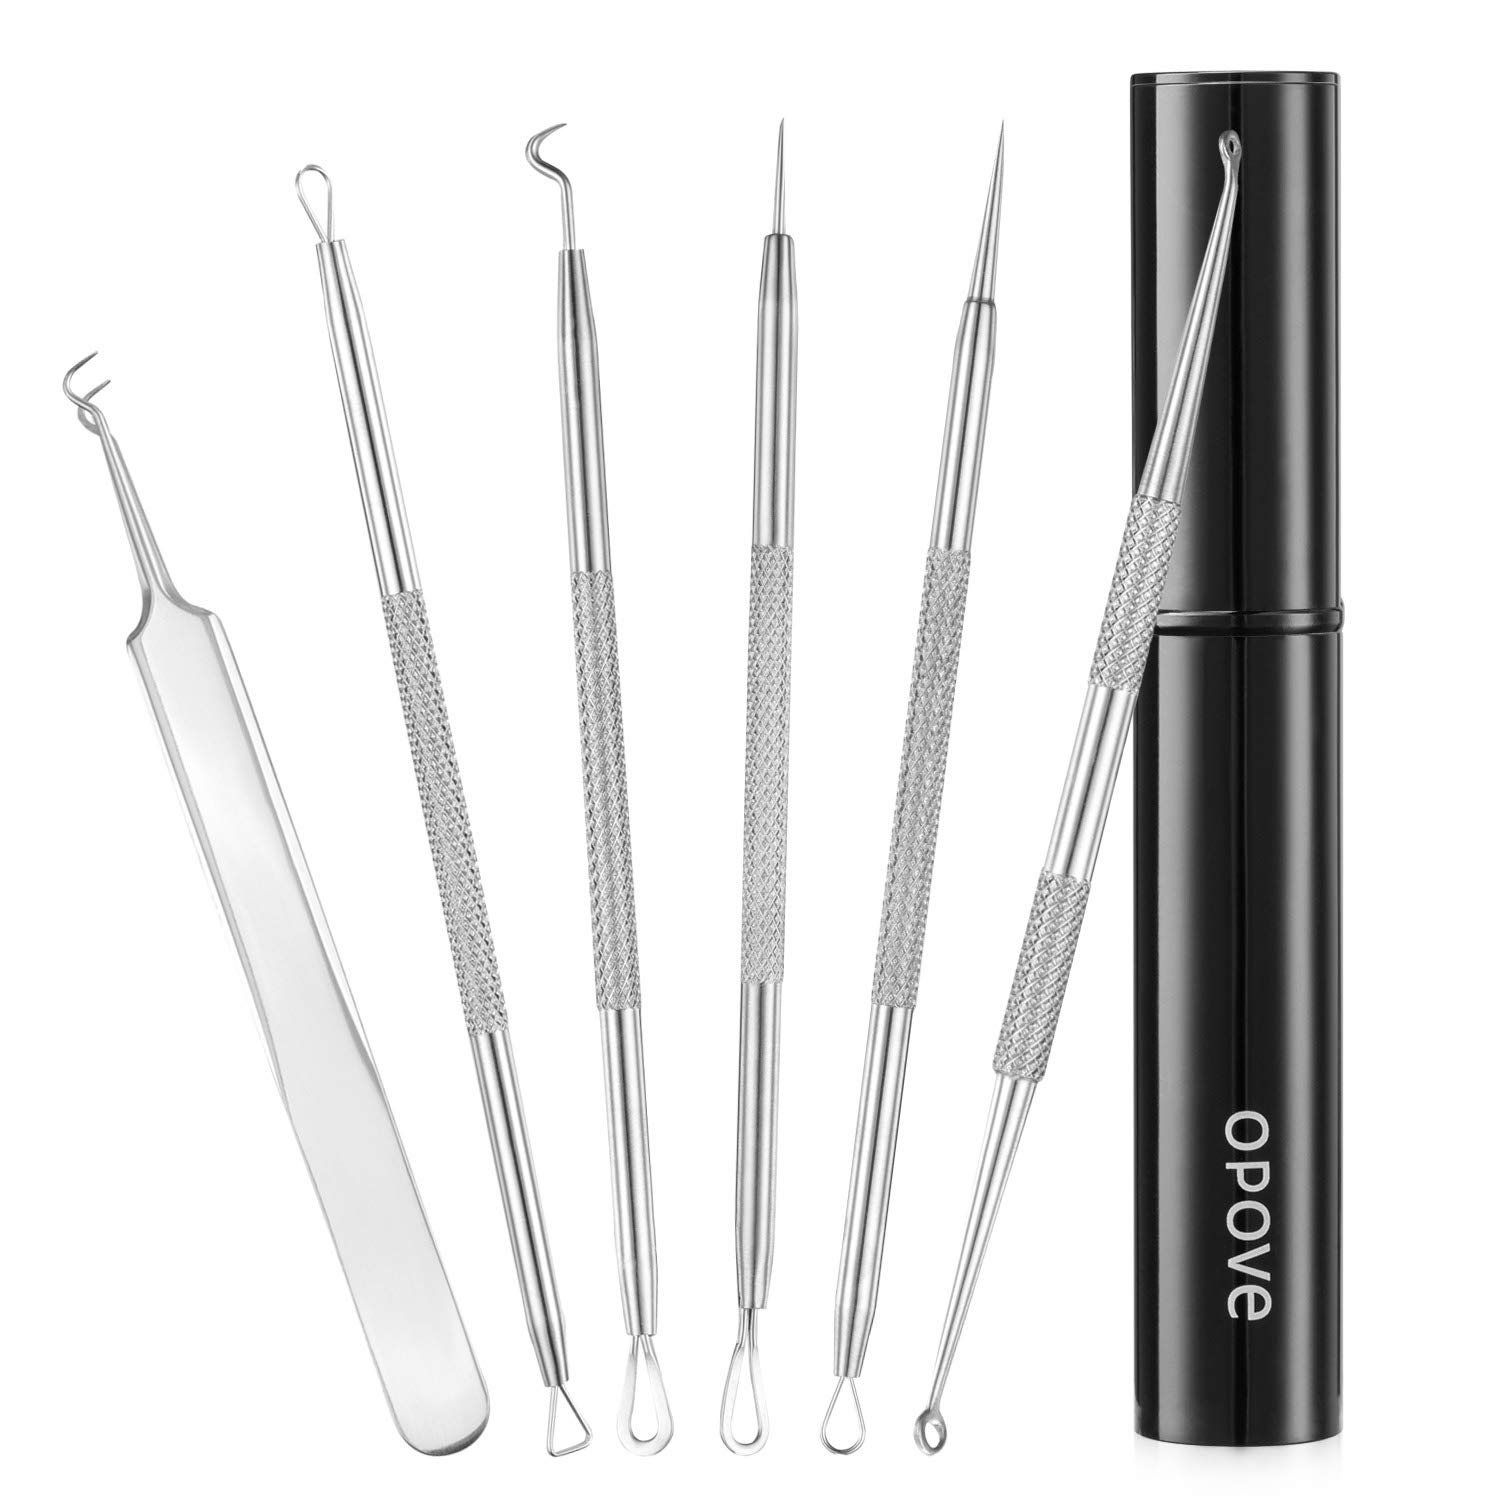 Book Cover Blackhead Remover Kit Pimple Comedone Extractor Acne Removal Tool Skin Care, Best Treatment for Blemish Whitehead Popper Zit, Surgical Stainless Steel, Portable Carrying Case, opove EXK1